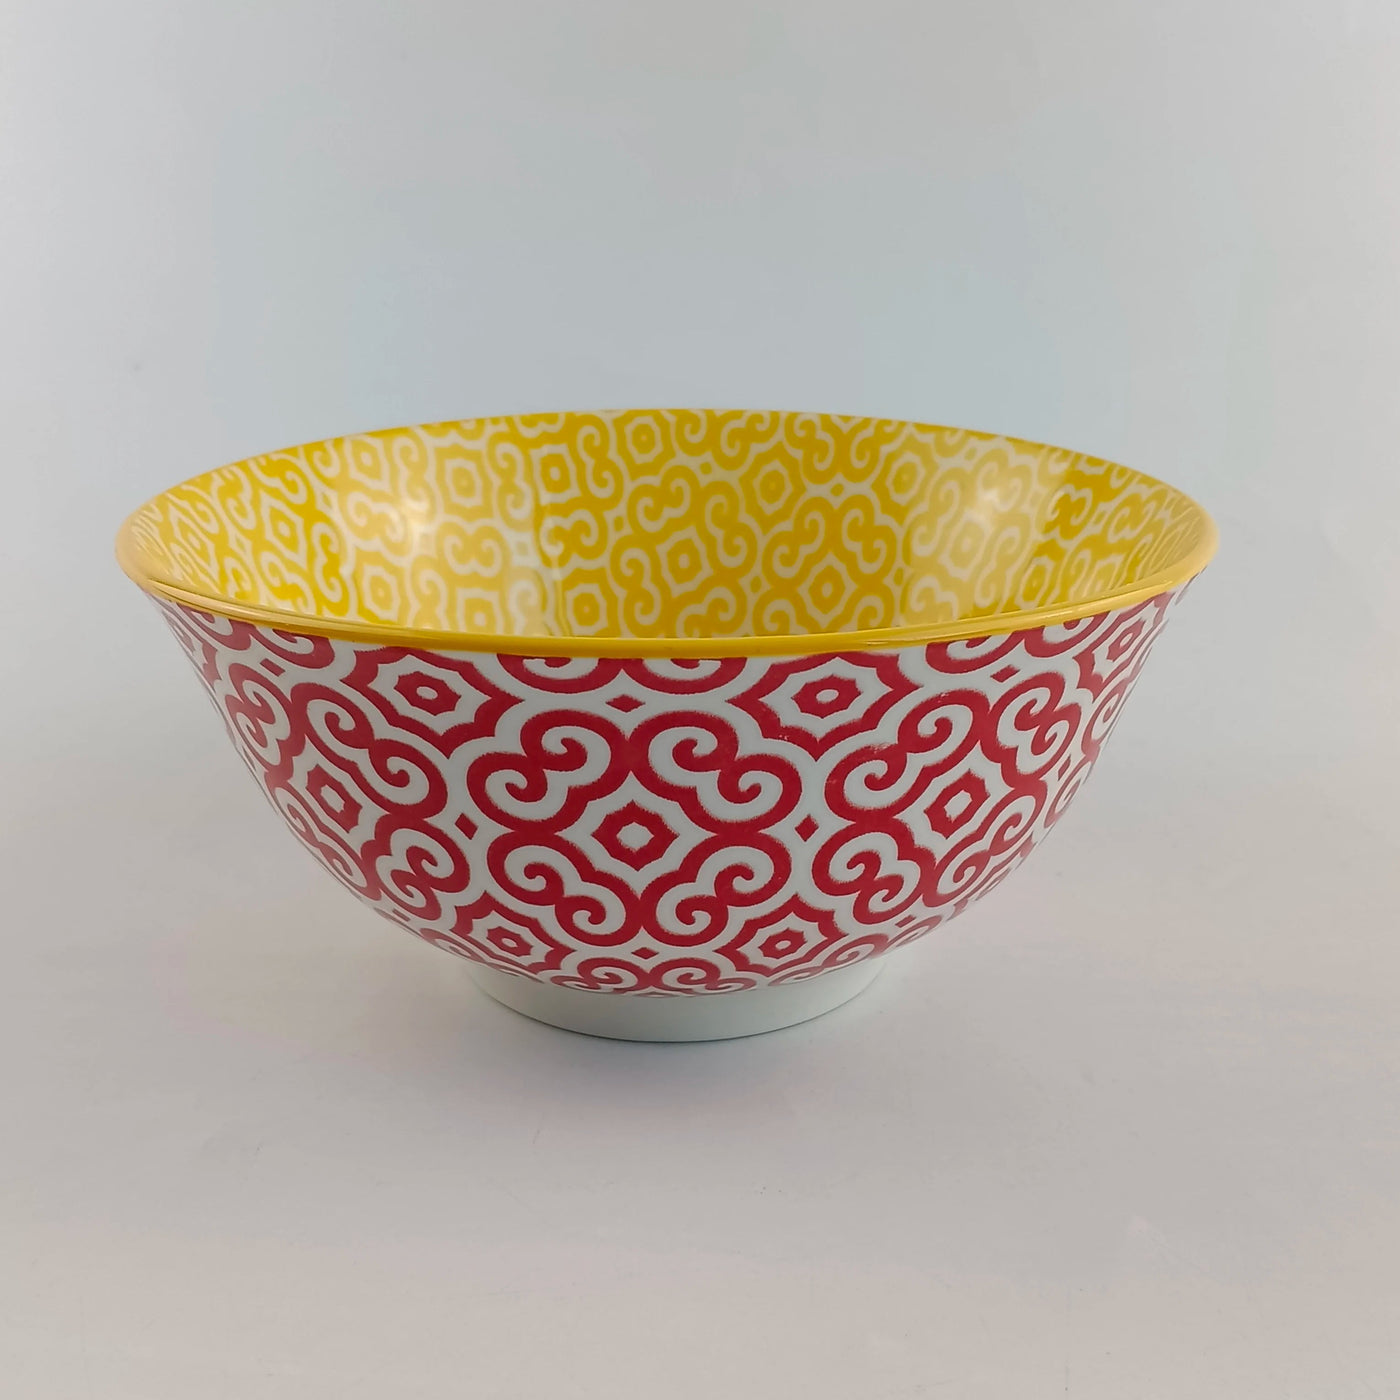 custom Restaurant Colorful Hand-Painted luxury dessert bowlPorcelain Cereal, Soup, Salad and Pasta Yellow/Red